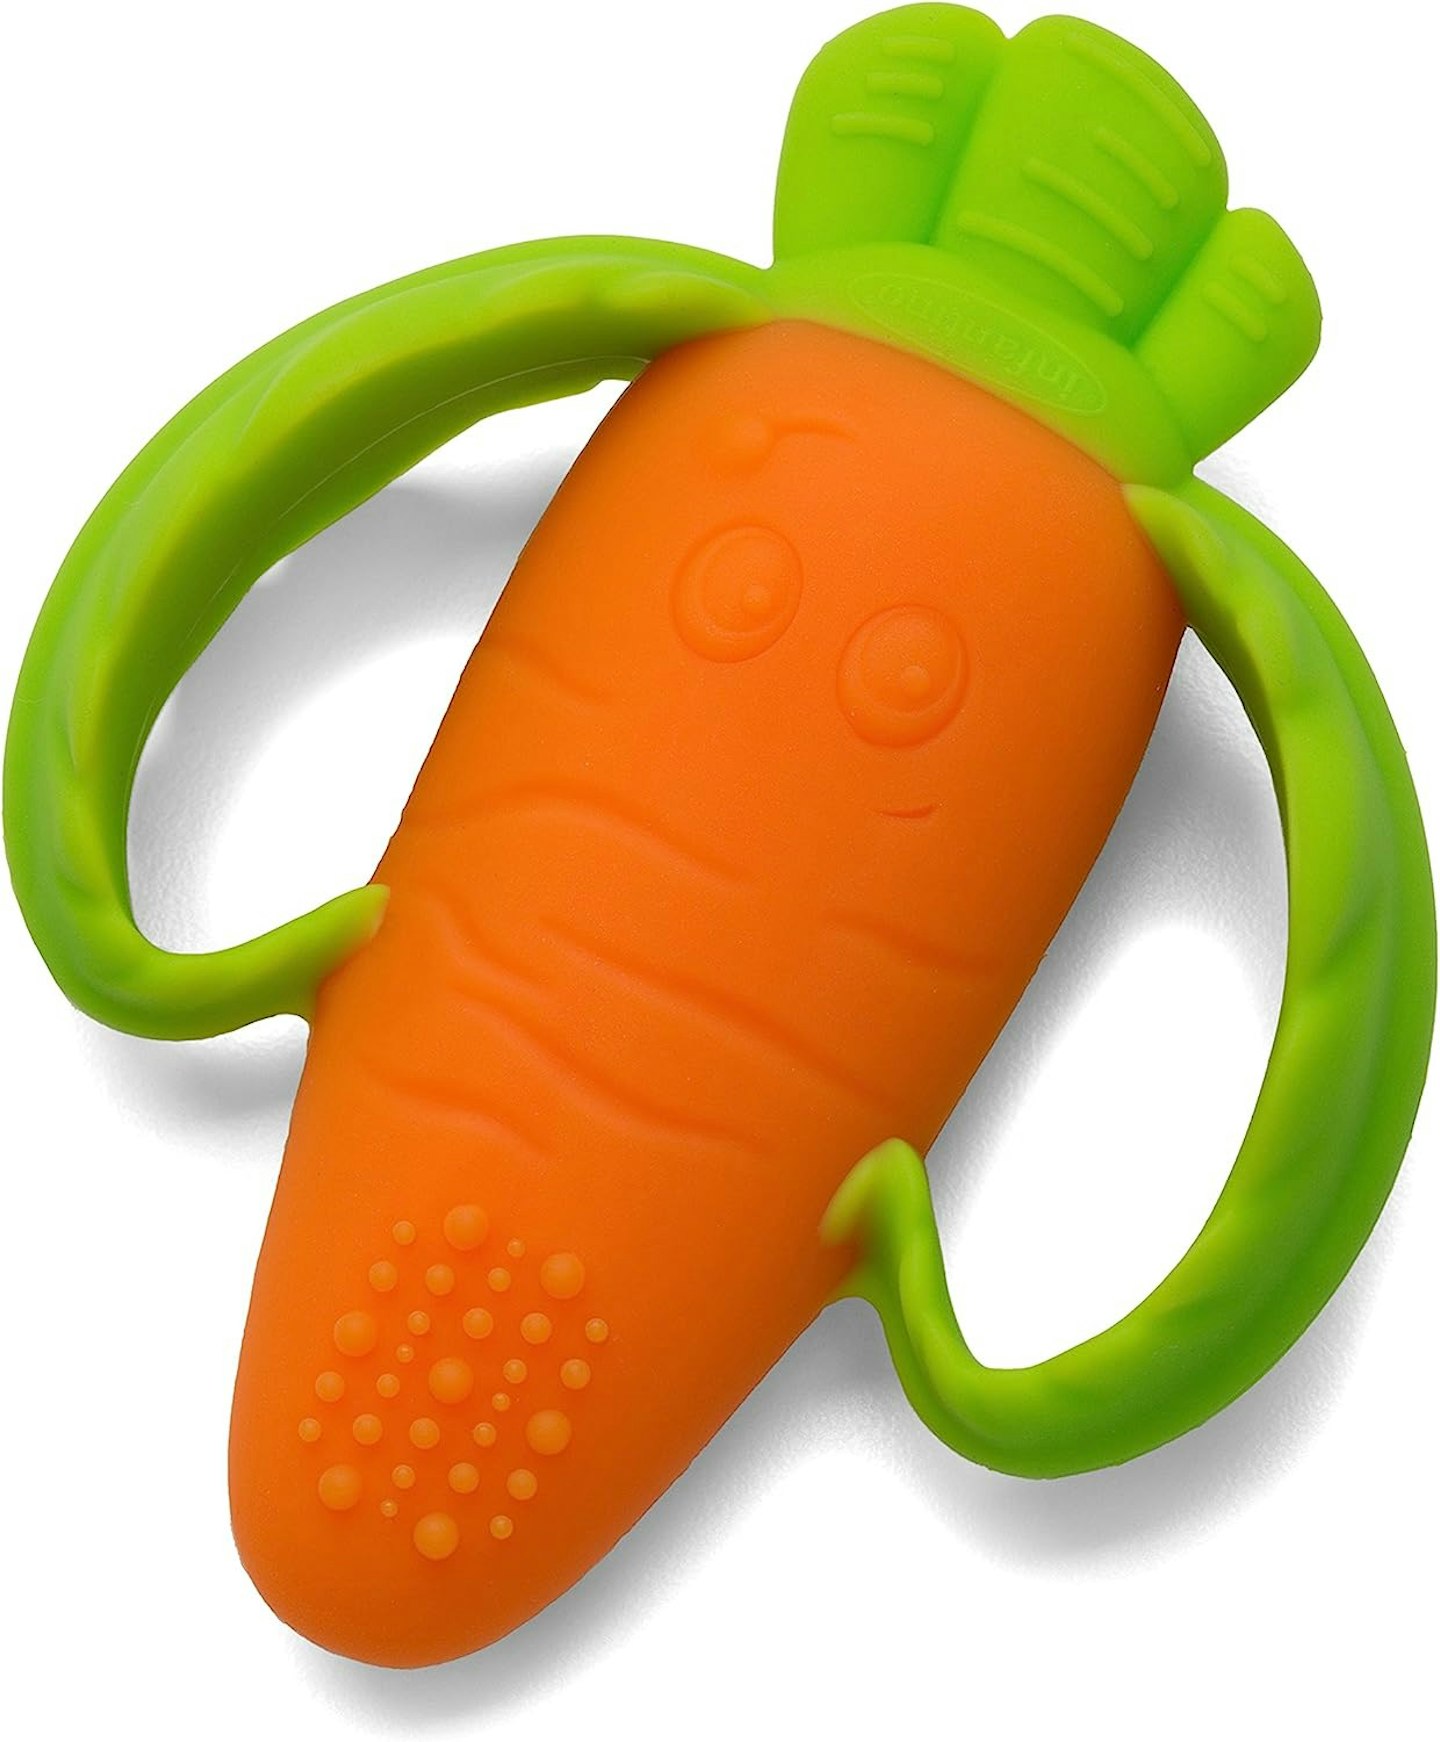 Carrot shaped teether 